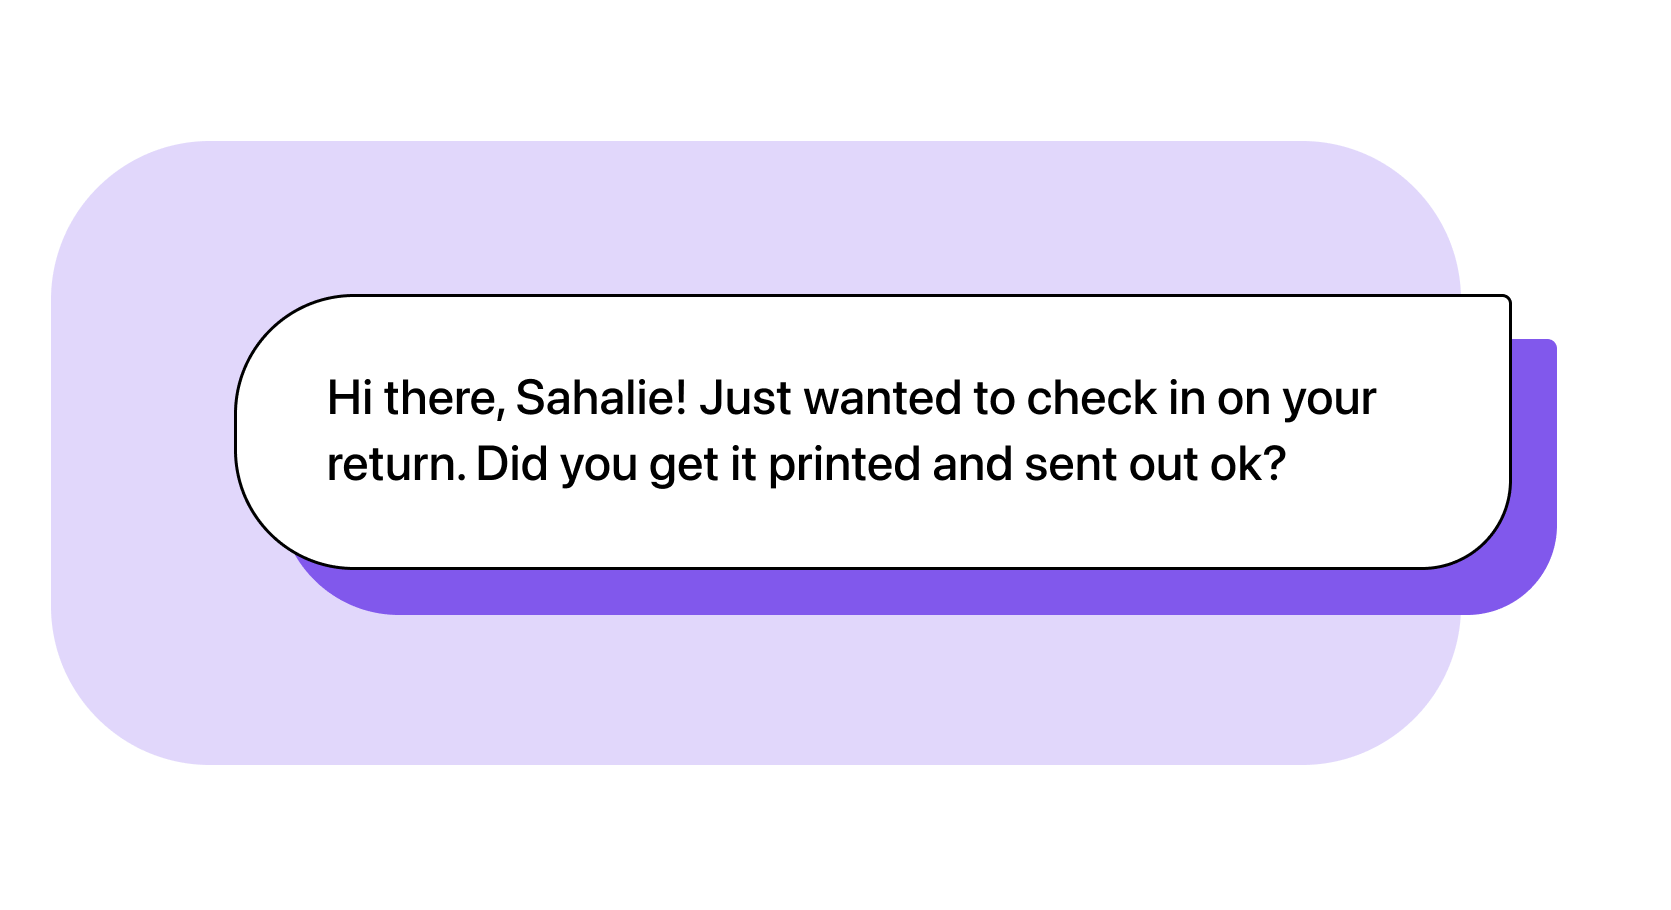 Agent: Hi there, Sahalie! Just wanted to check in on your return. Did you get it printed and sent out ok?